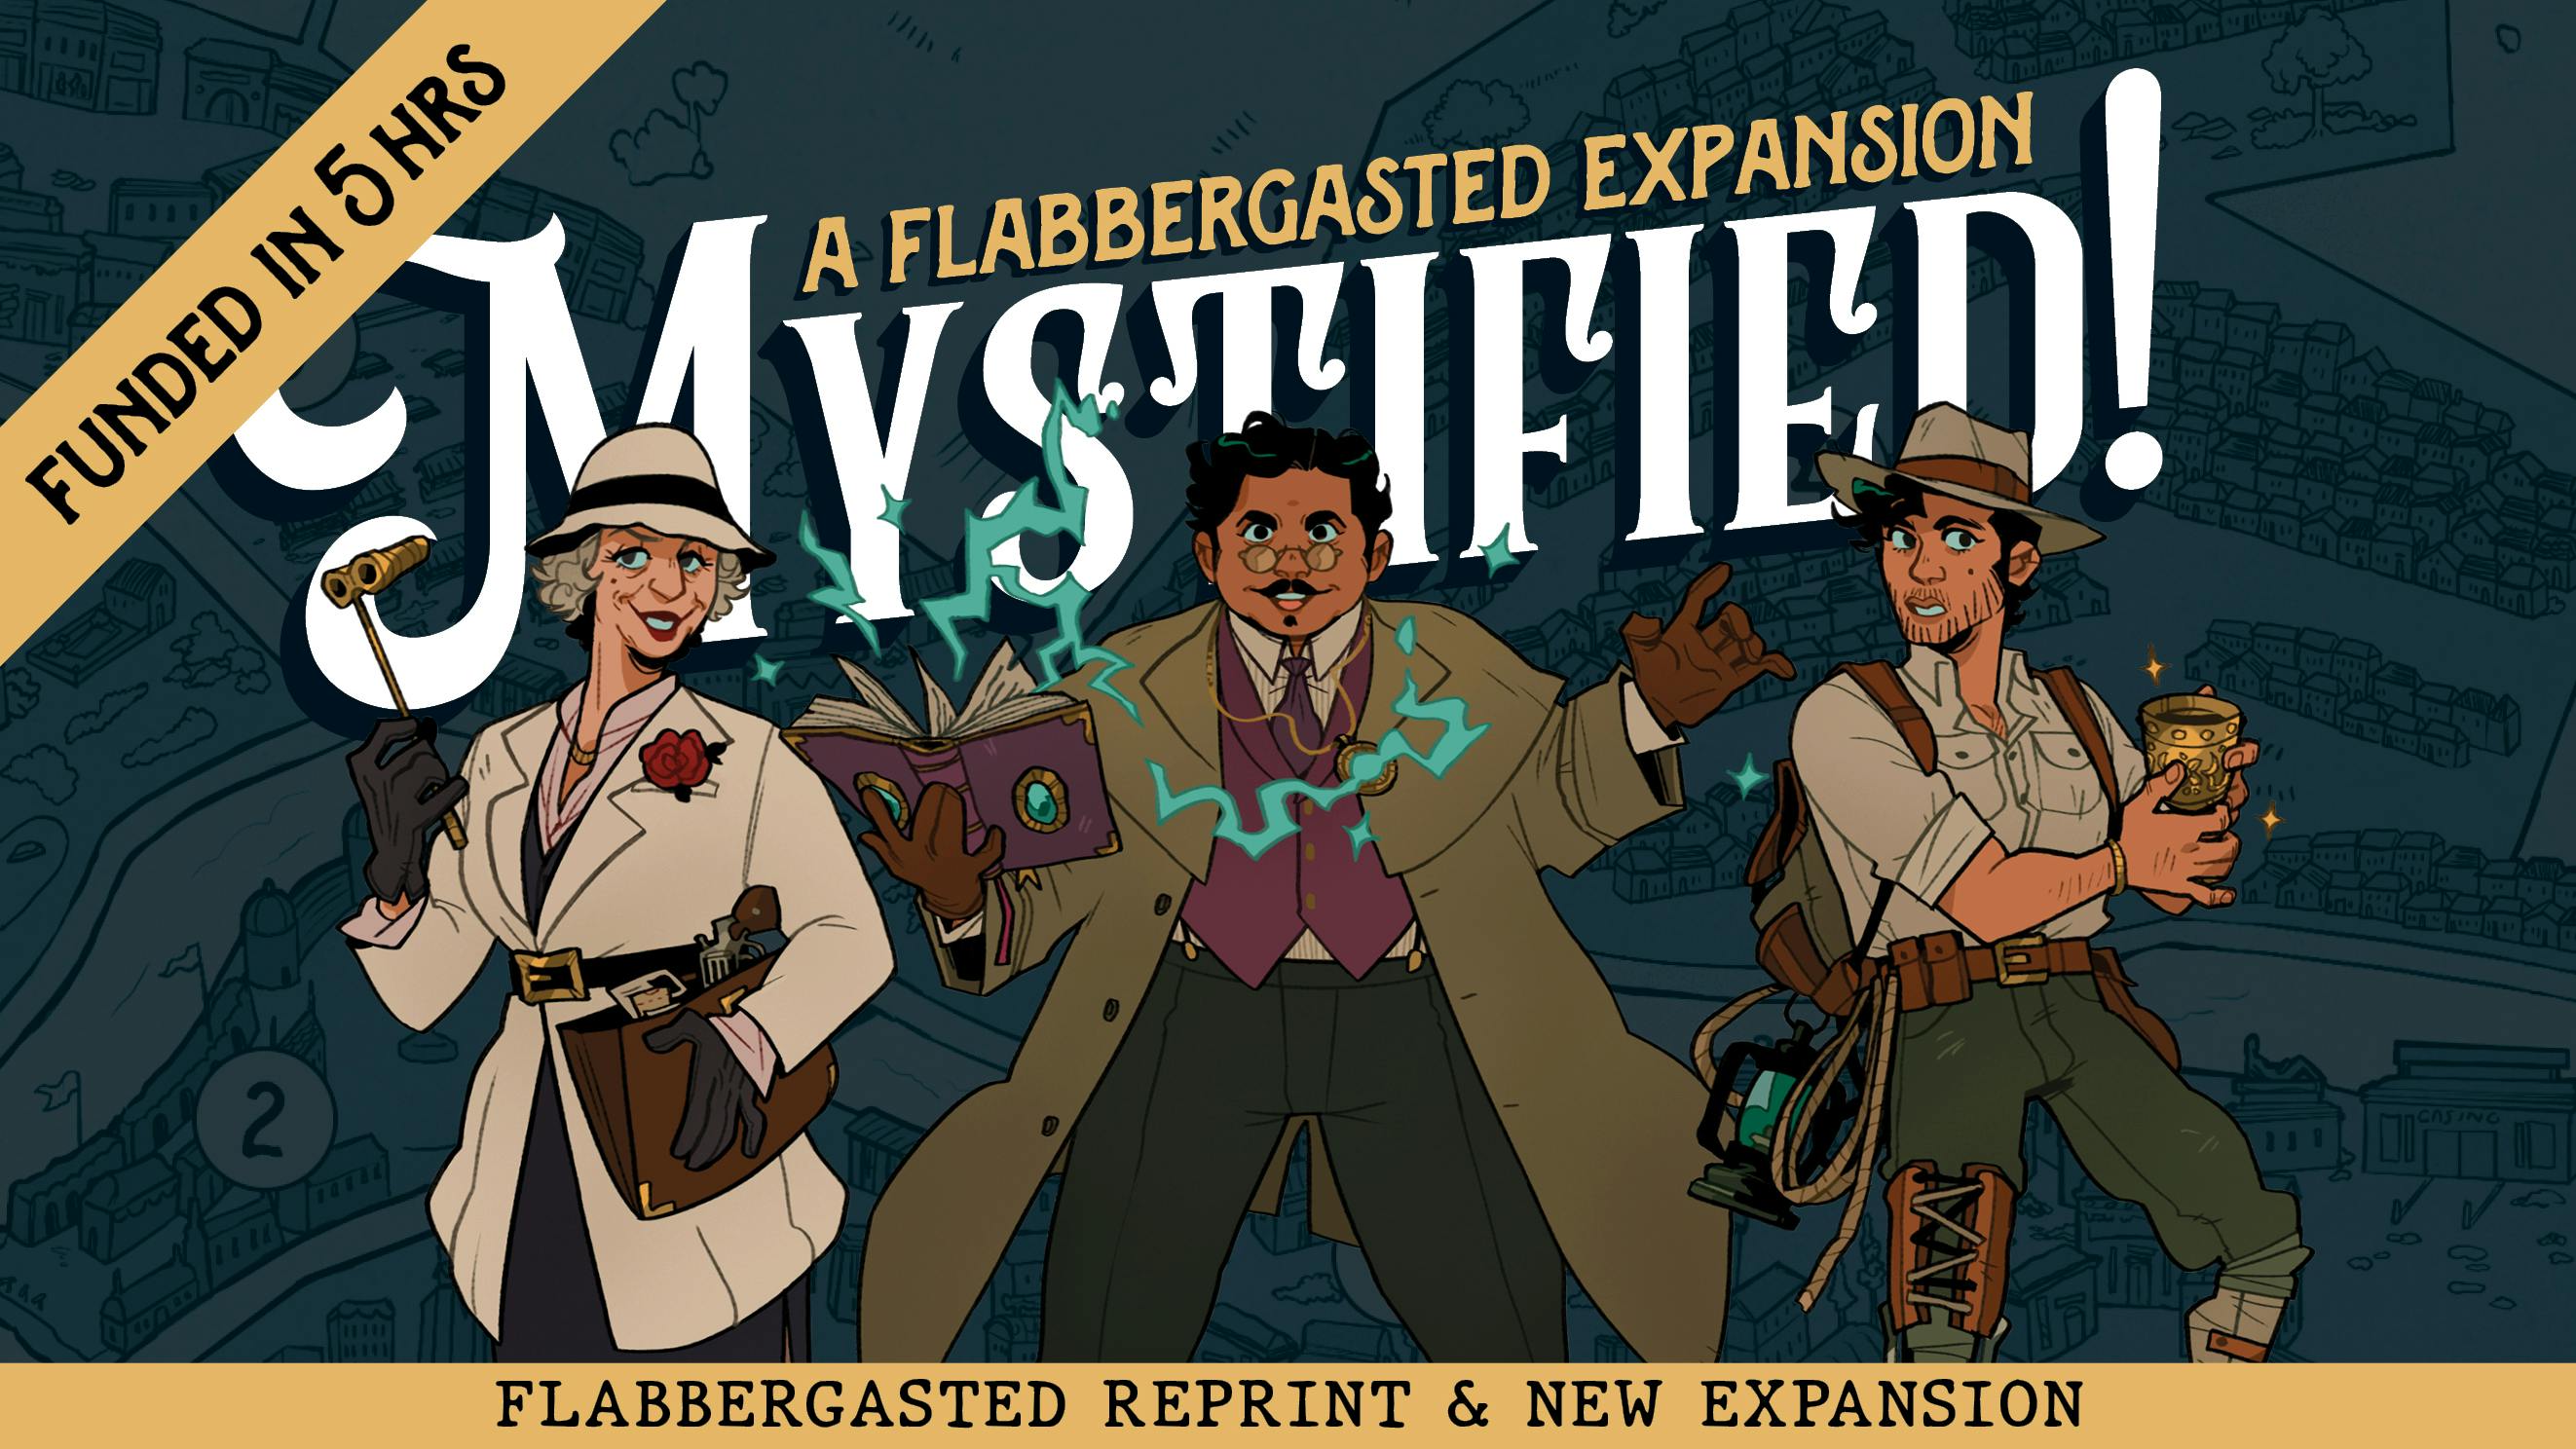 Mystified! A Flabbergasted expansion